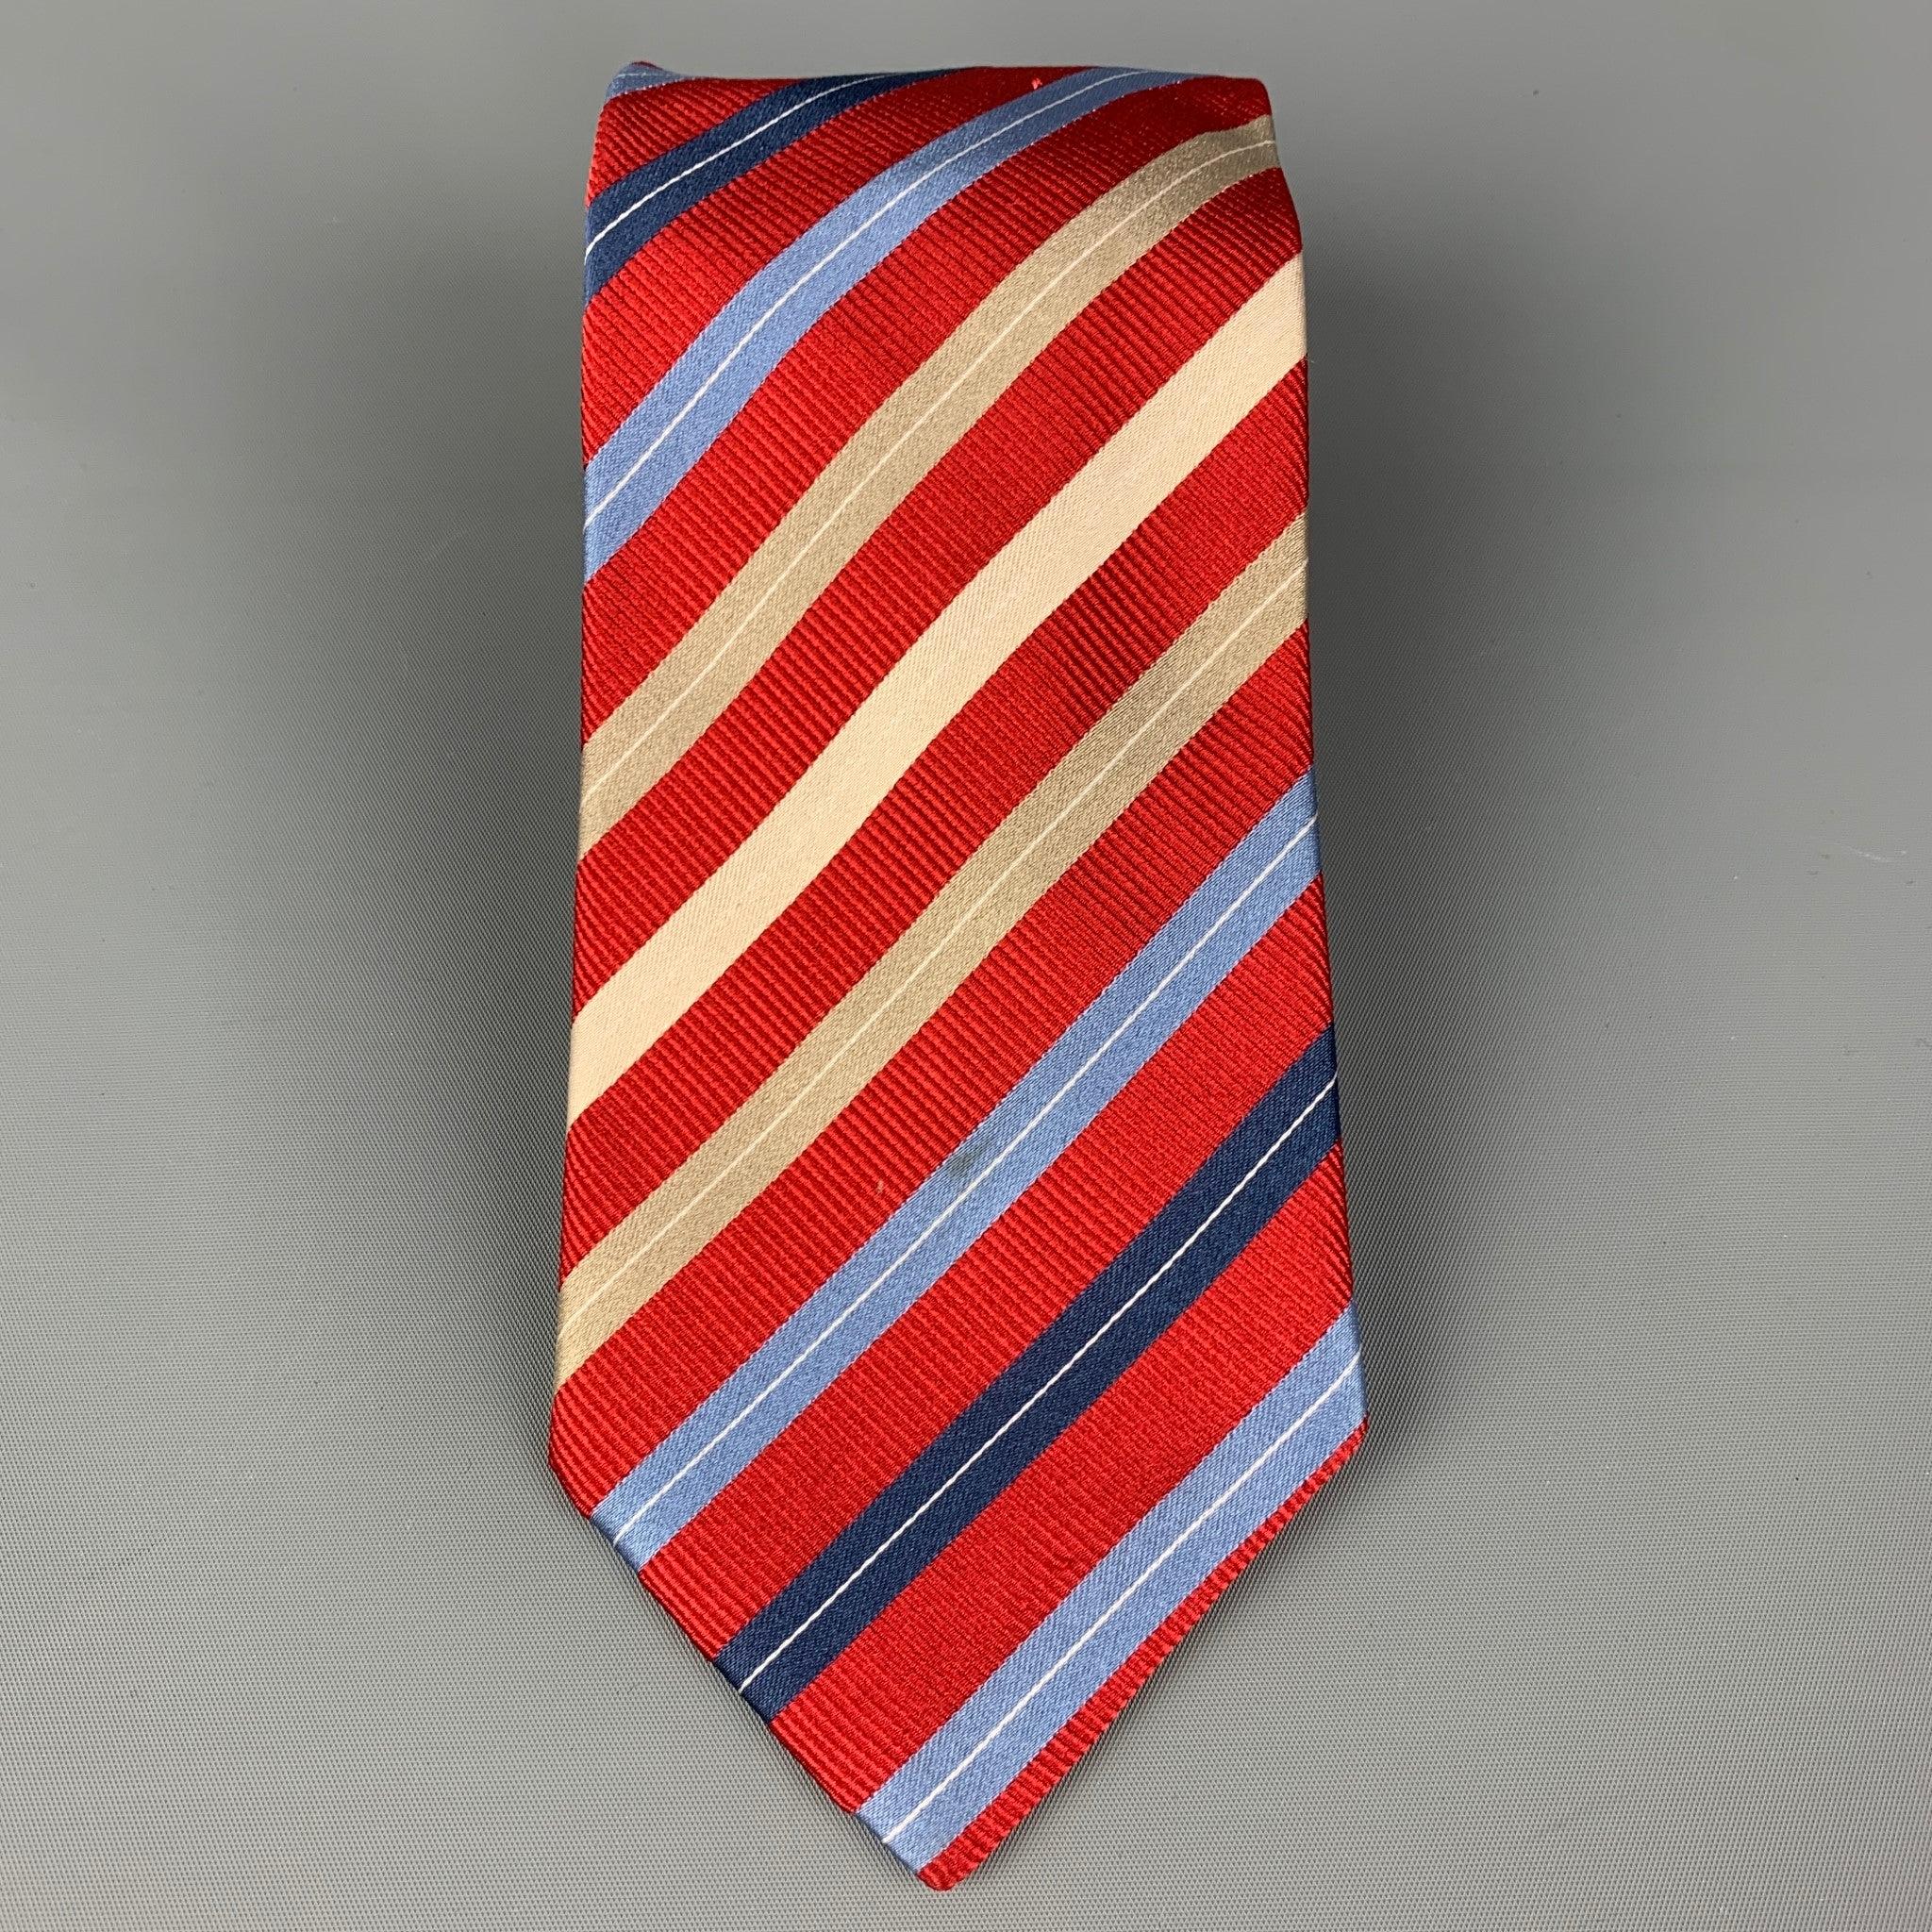 ERMENEGILDO ZEGNA necktie comes in a red & blue silk with a all over diagonal stripe print. Made in Italy.
 Very Good
 Pre-Owned Condition.Width: 3.5 inches 
  
  
  
 Sui Generis Reference: 117129
 Category: Tie
 More Details
  
 Brand: ERMENEGILDO